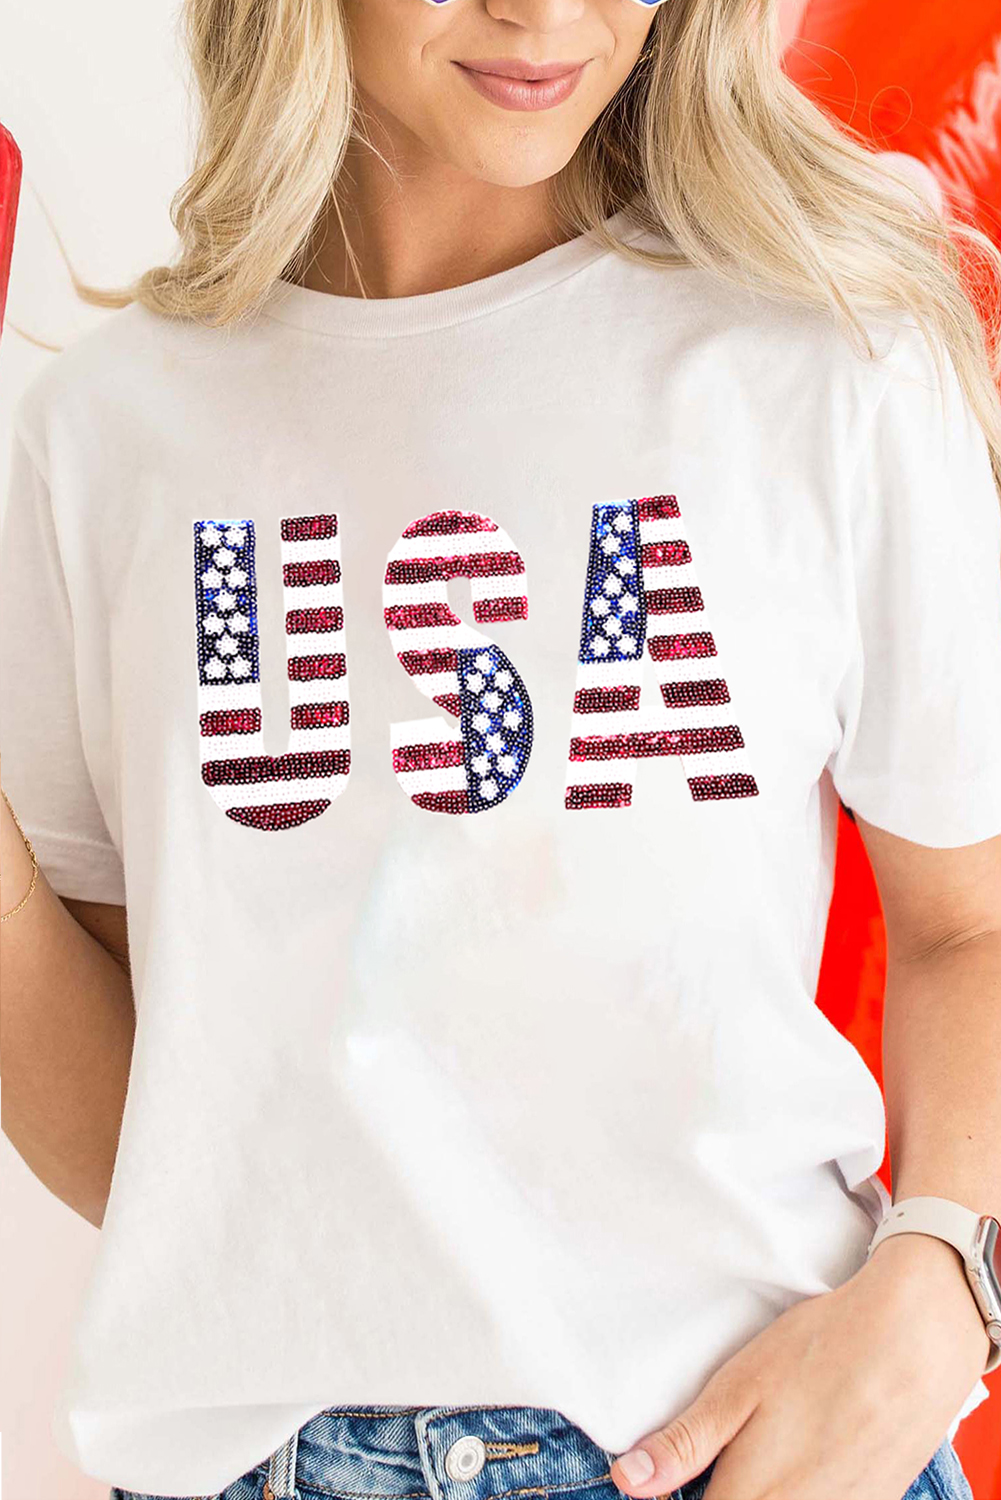 Shewin Wholesale Chic Female White USA FLAG Sequin Graphic Patched Round Neck T Shirt